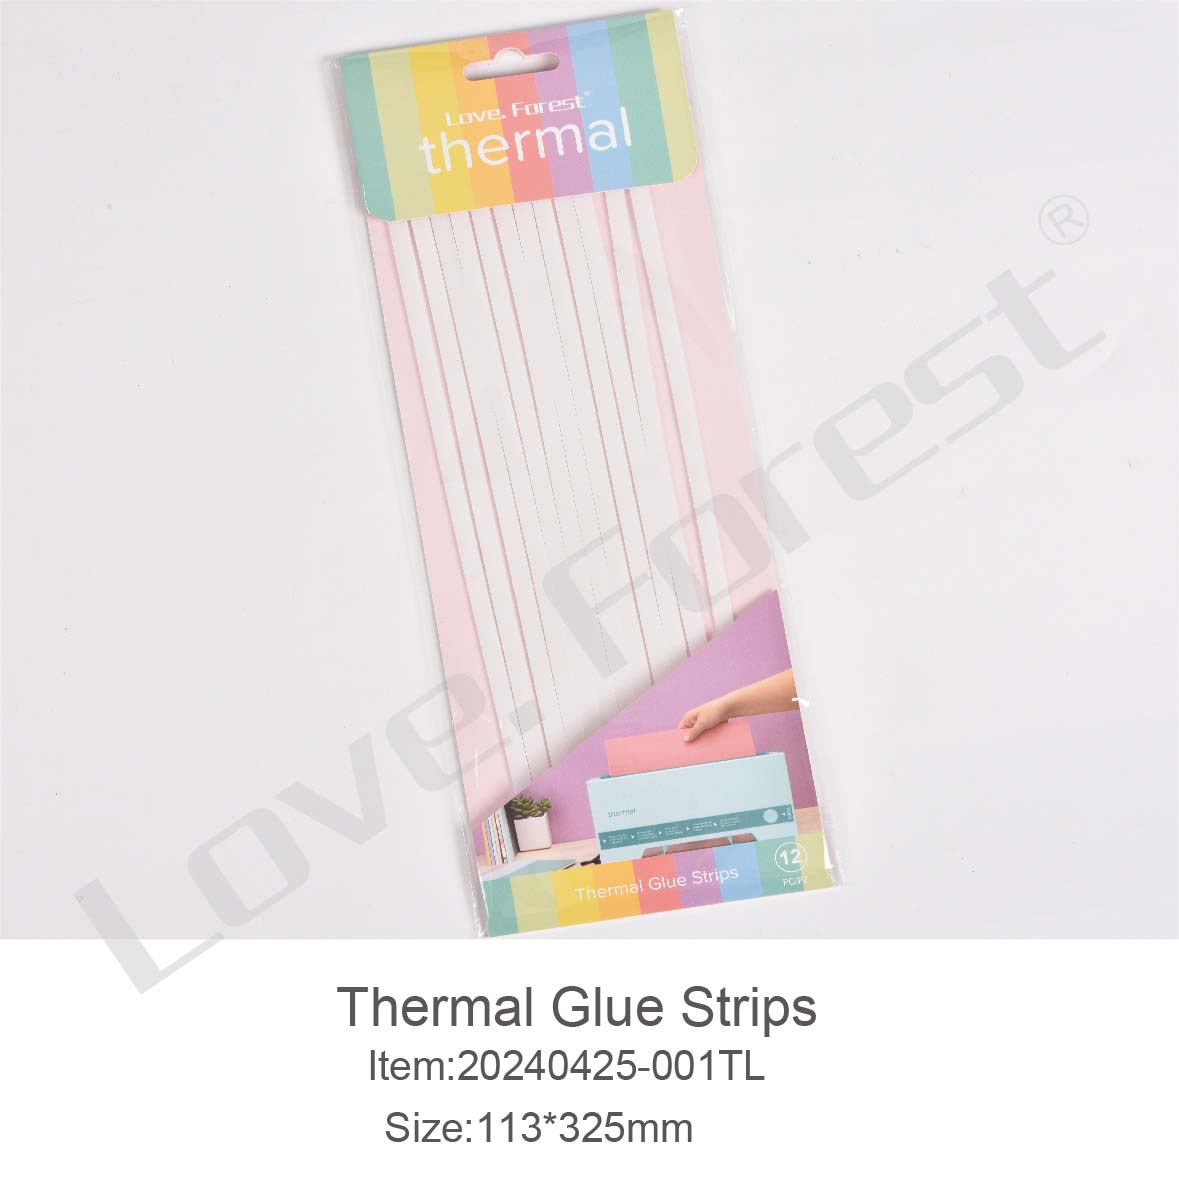 THERMAL GLUE STRIPS